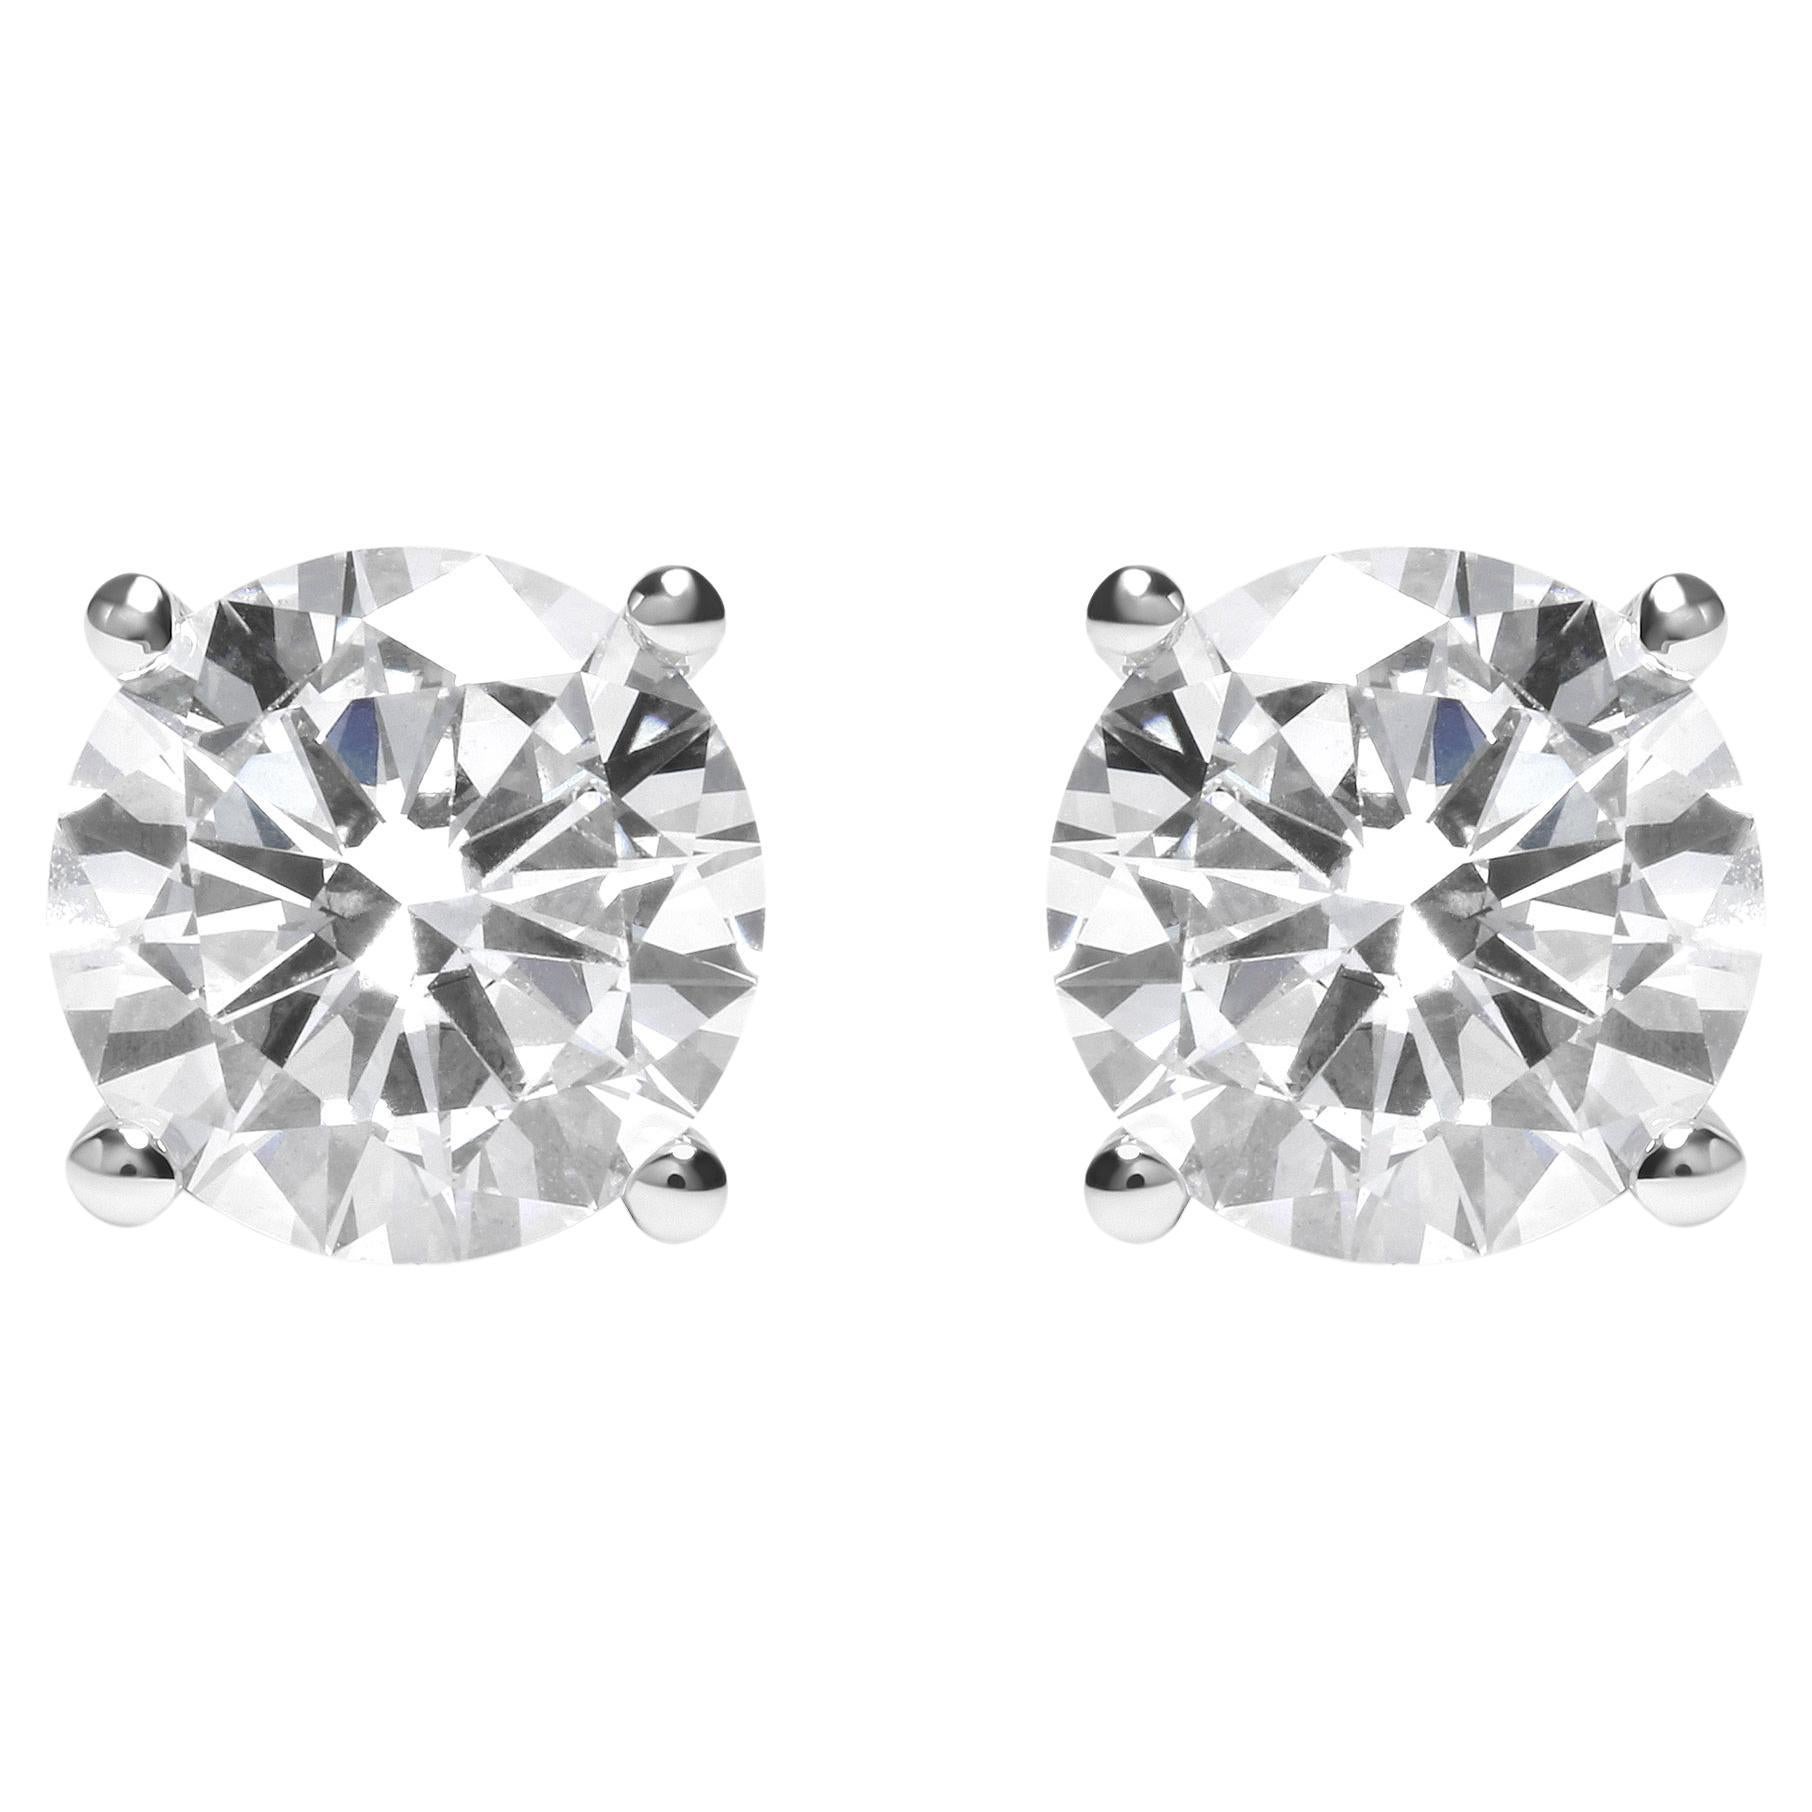 GIA Certified 14K White Gold 6.0 Carat Diamond Solitaire Stud Earrings